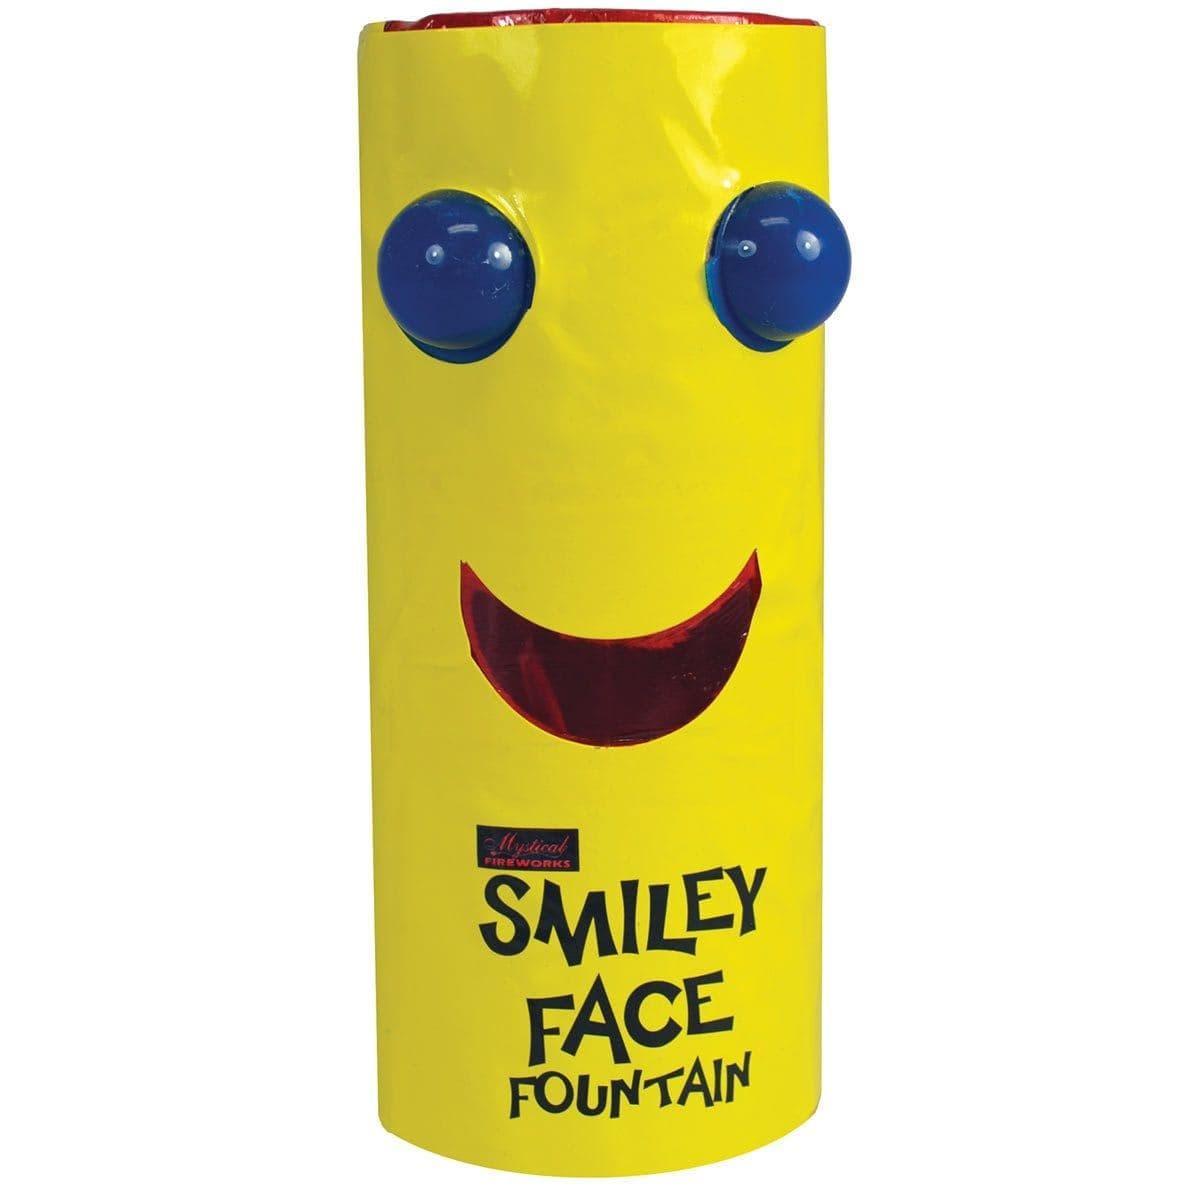 Buy Fireworks Smiley Face sold at Party Expert